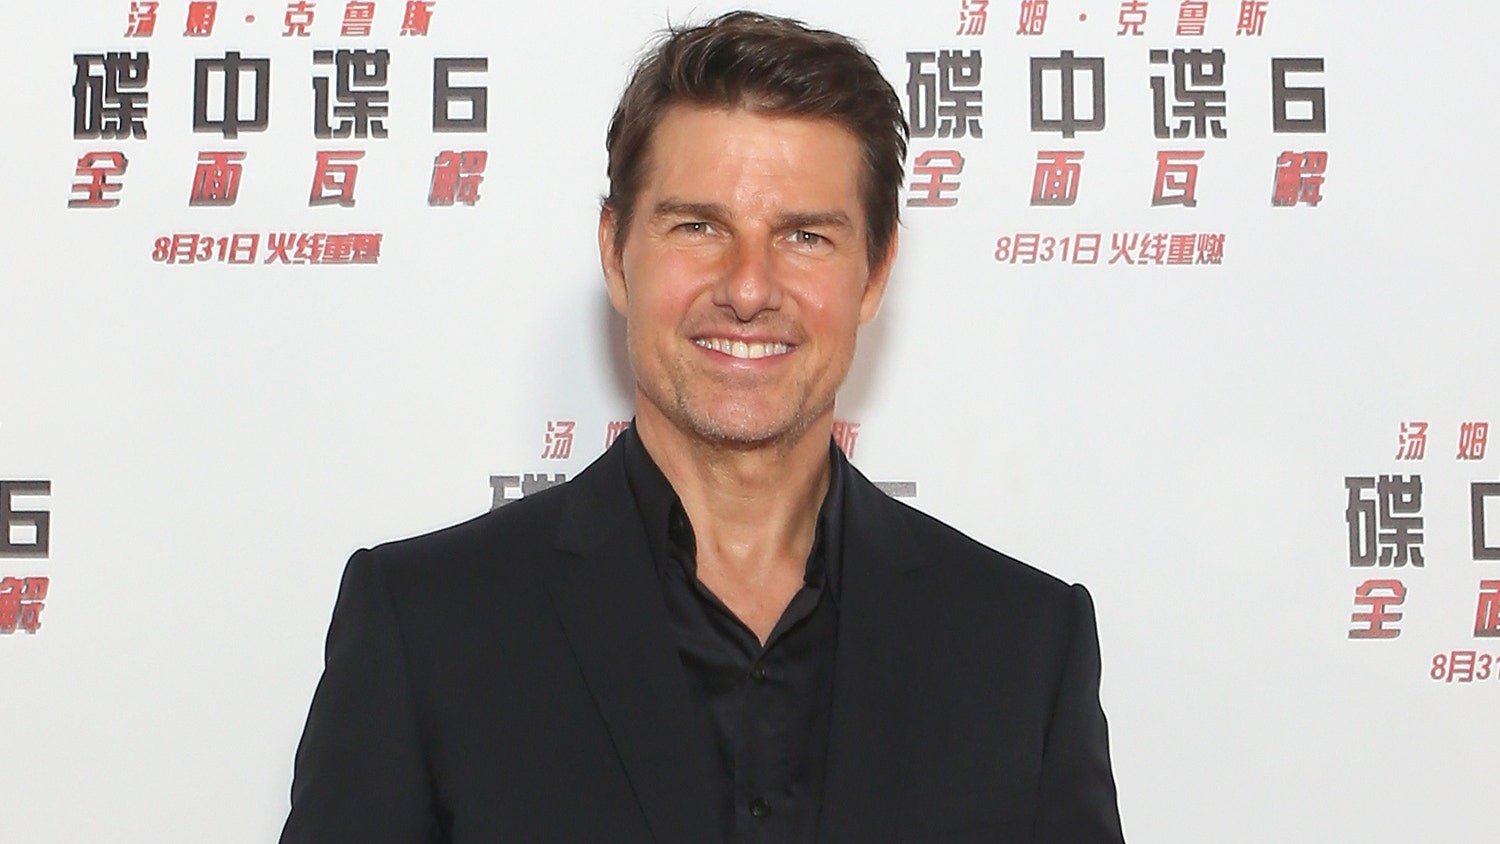 Tom Cruise yells at 'Mission: Impossible' crew members for breaking COVID-19 guidelines